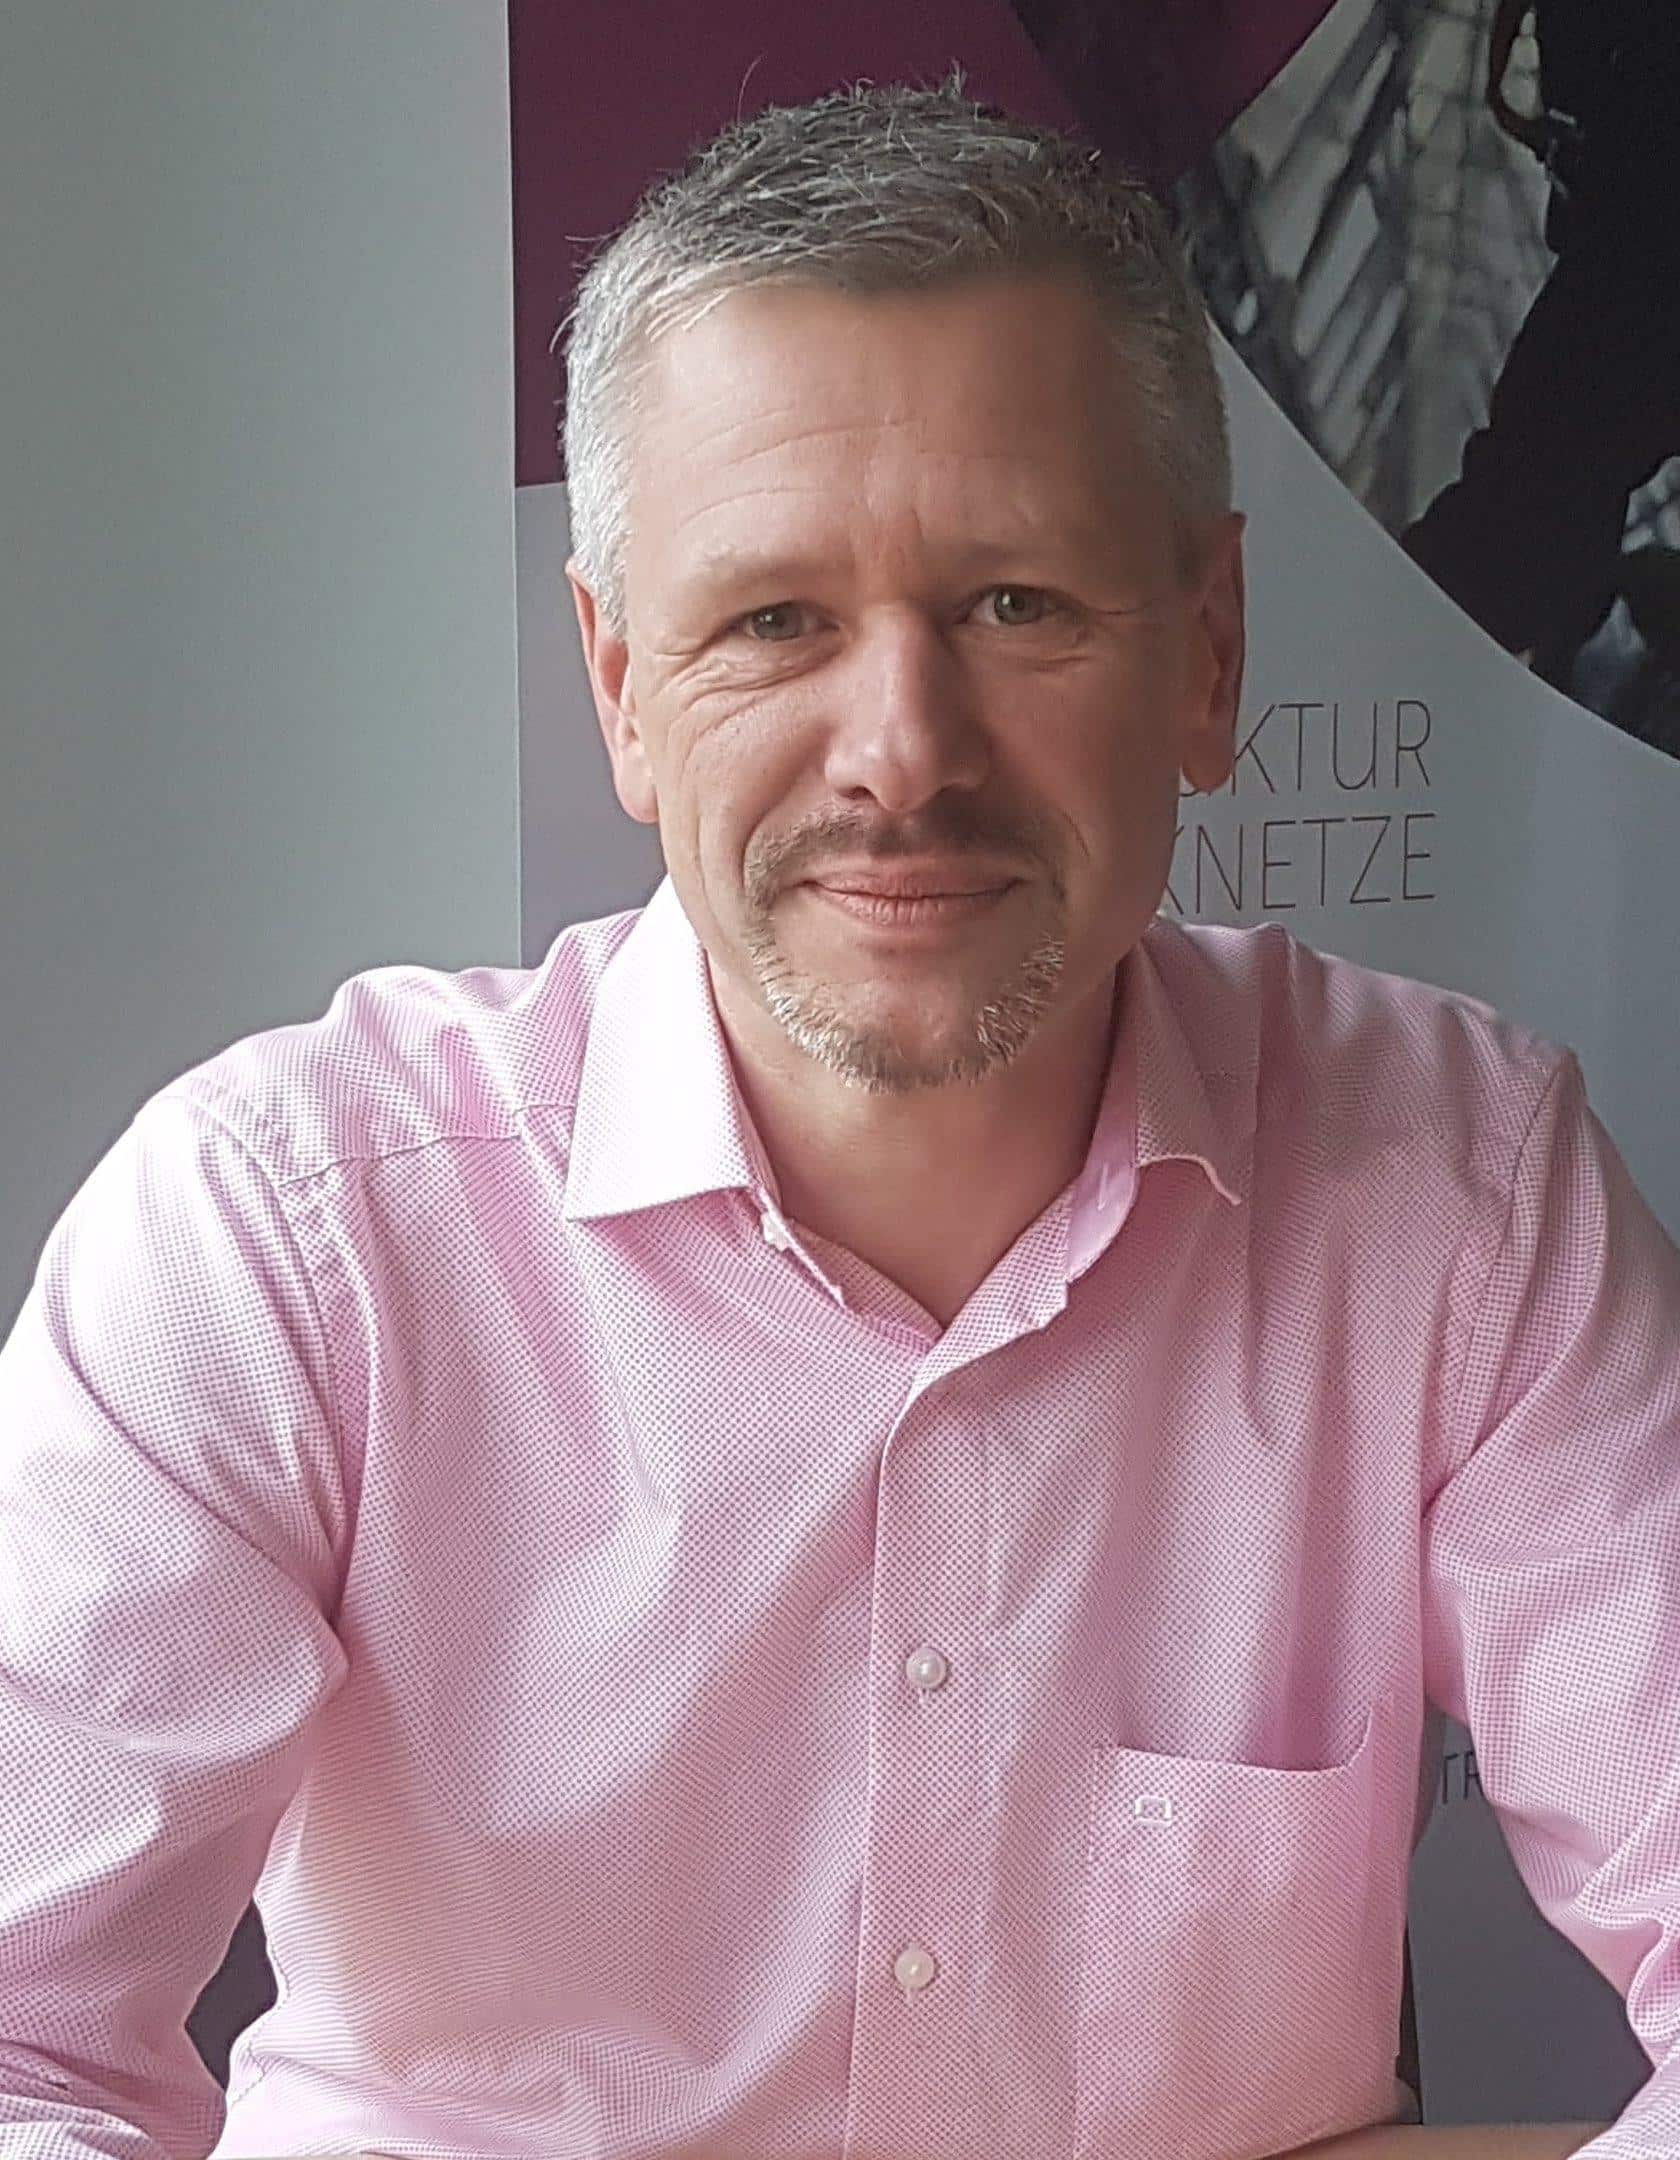 Armin Przirembel, director of the Mobile Networks division at Axians GA Netztechnik